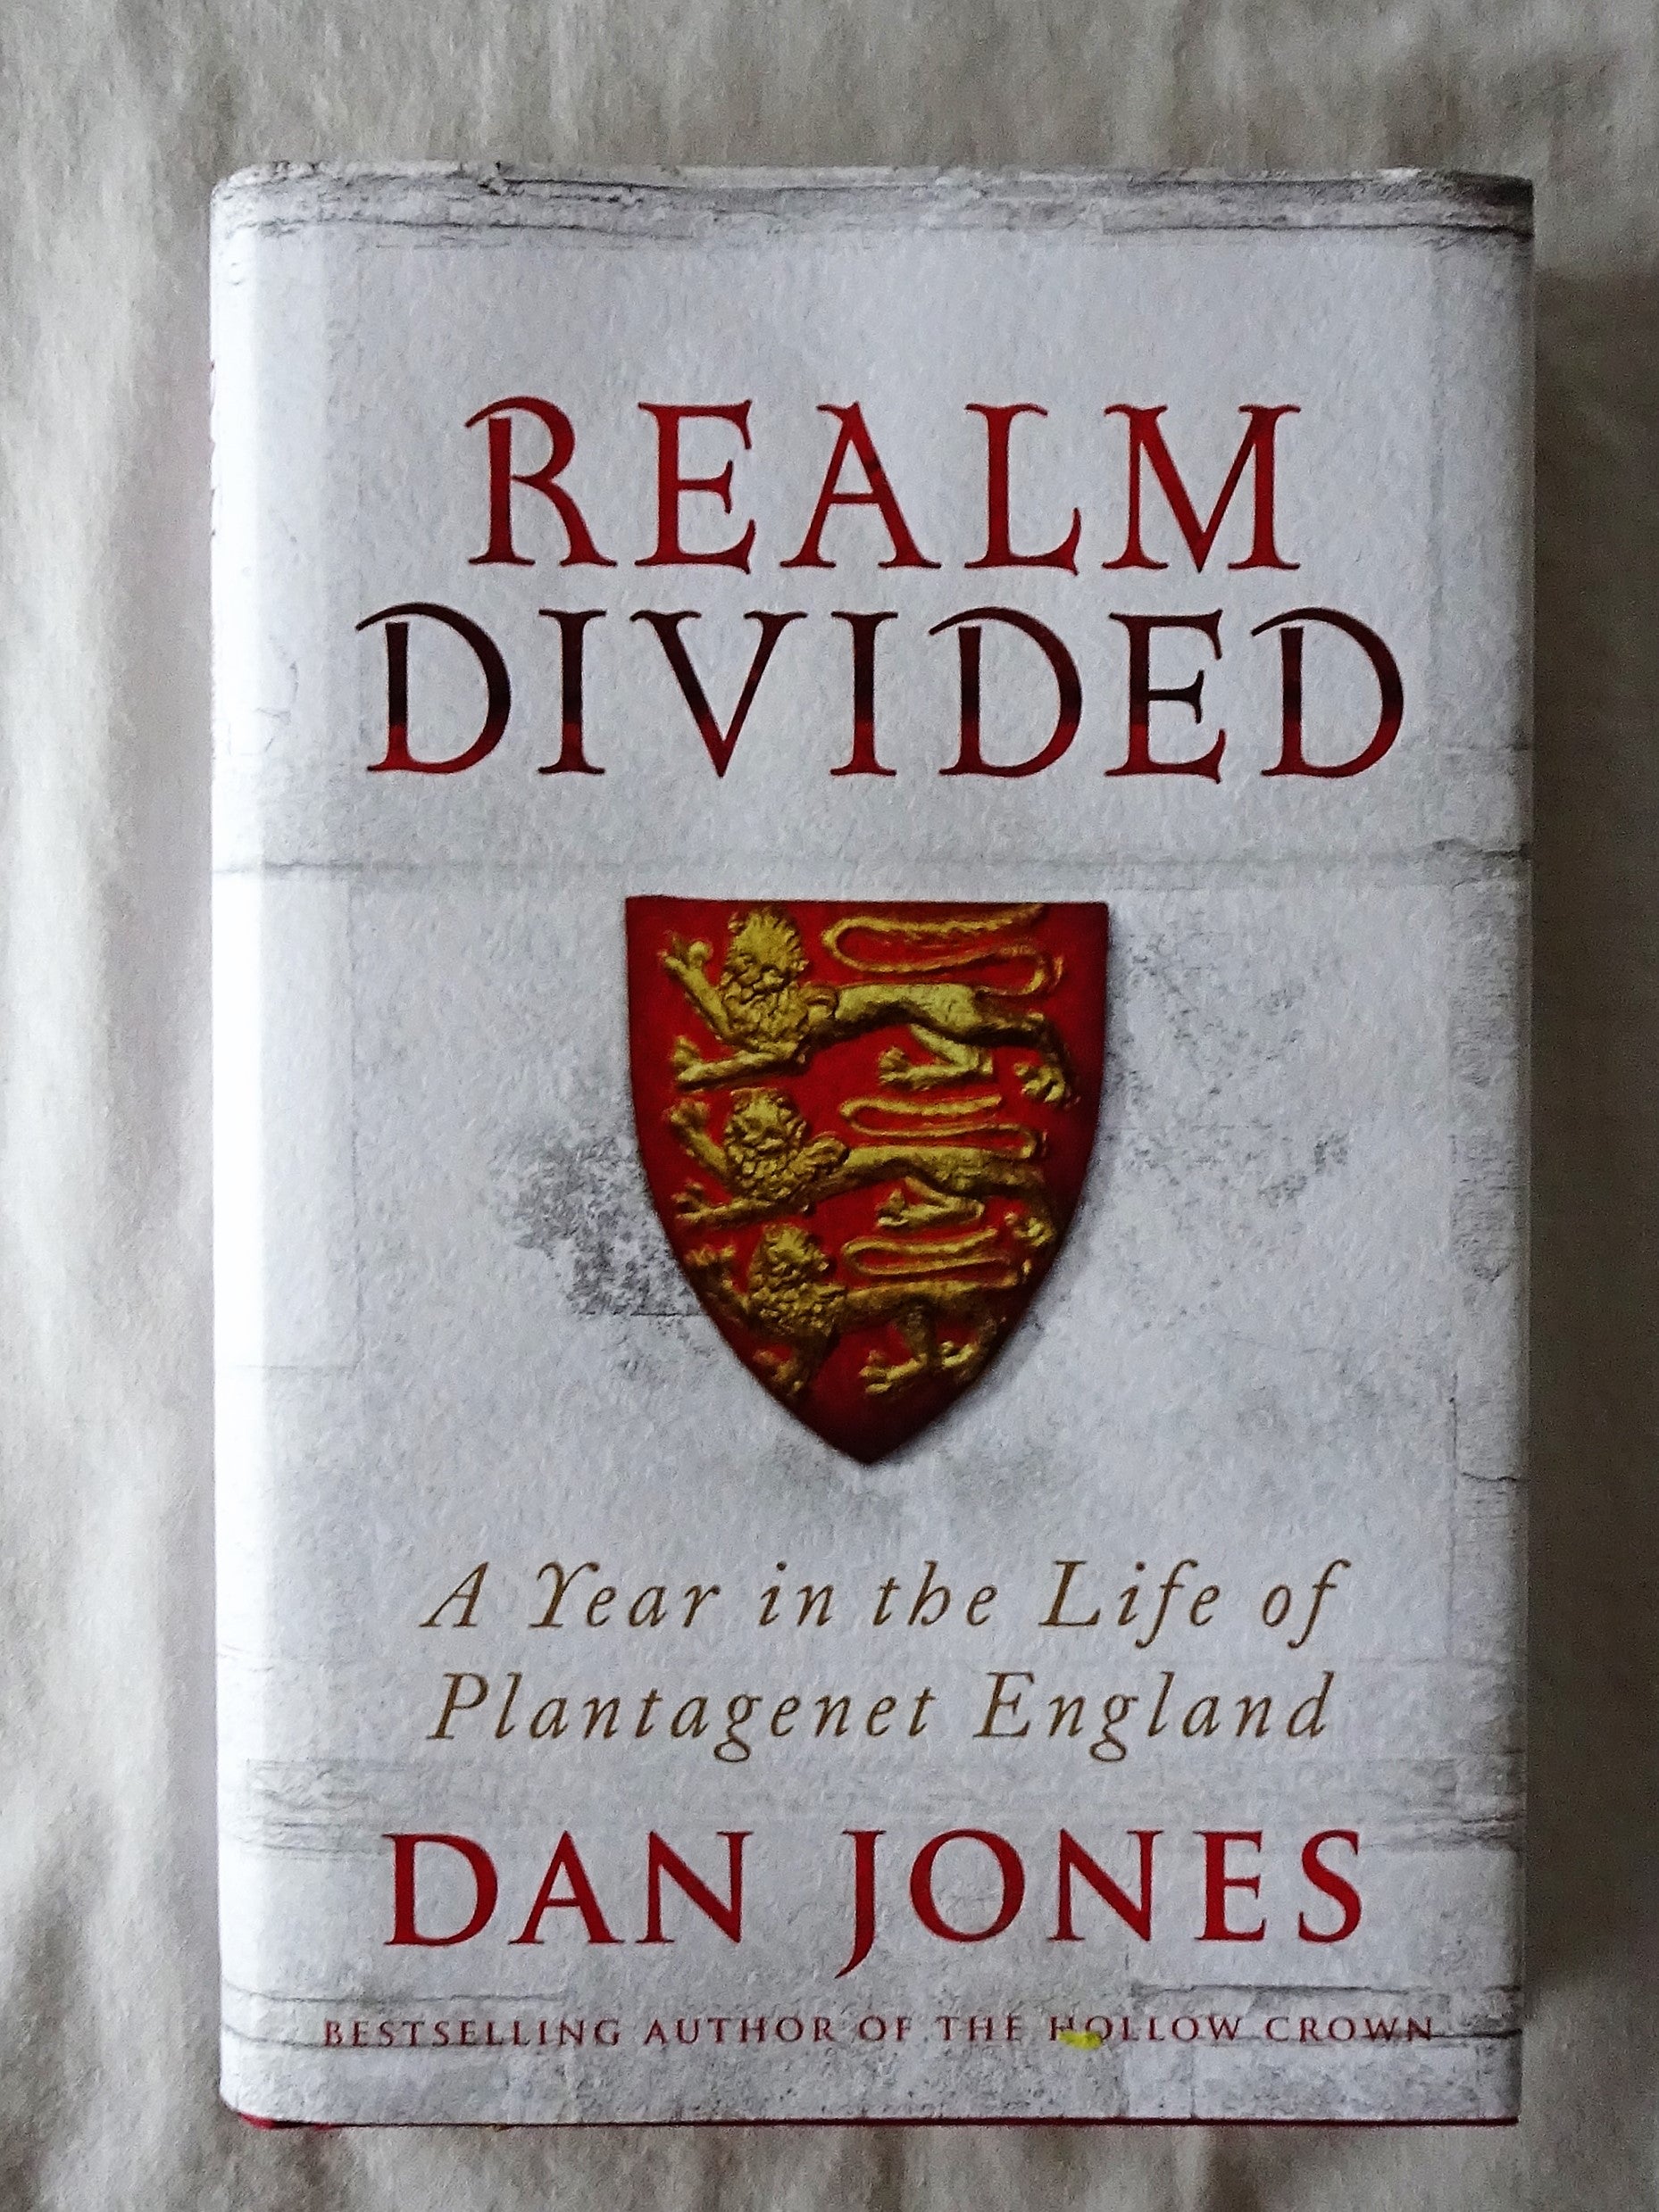 Realm Divided  A Year in the Life of Plantagenet England  by Dan Jones